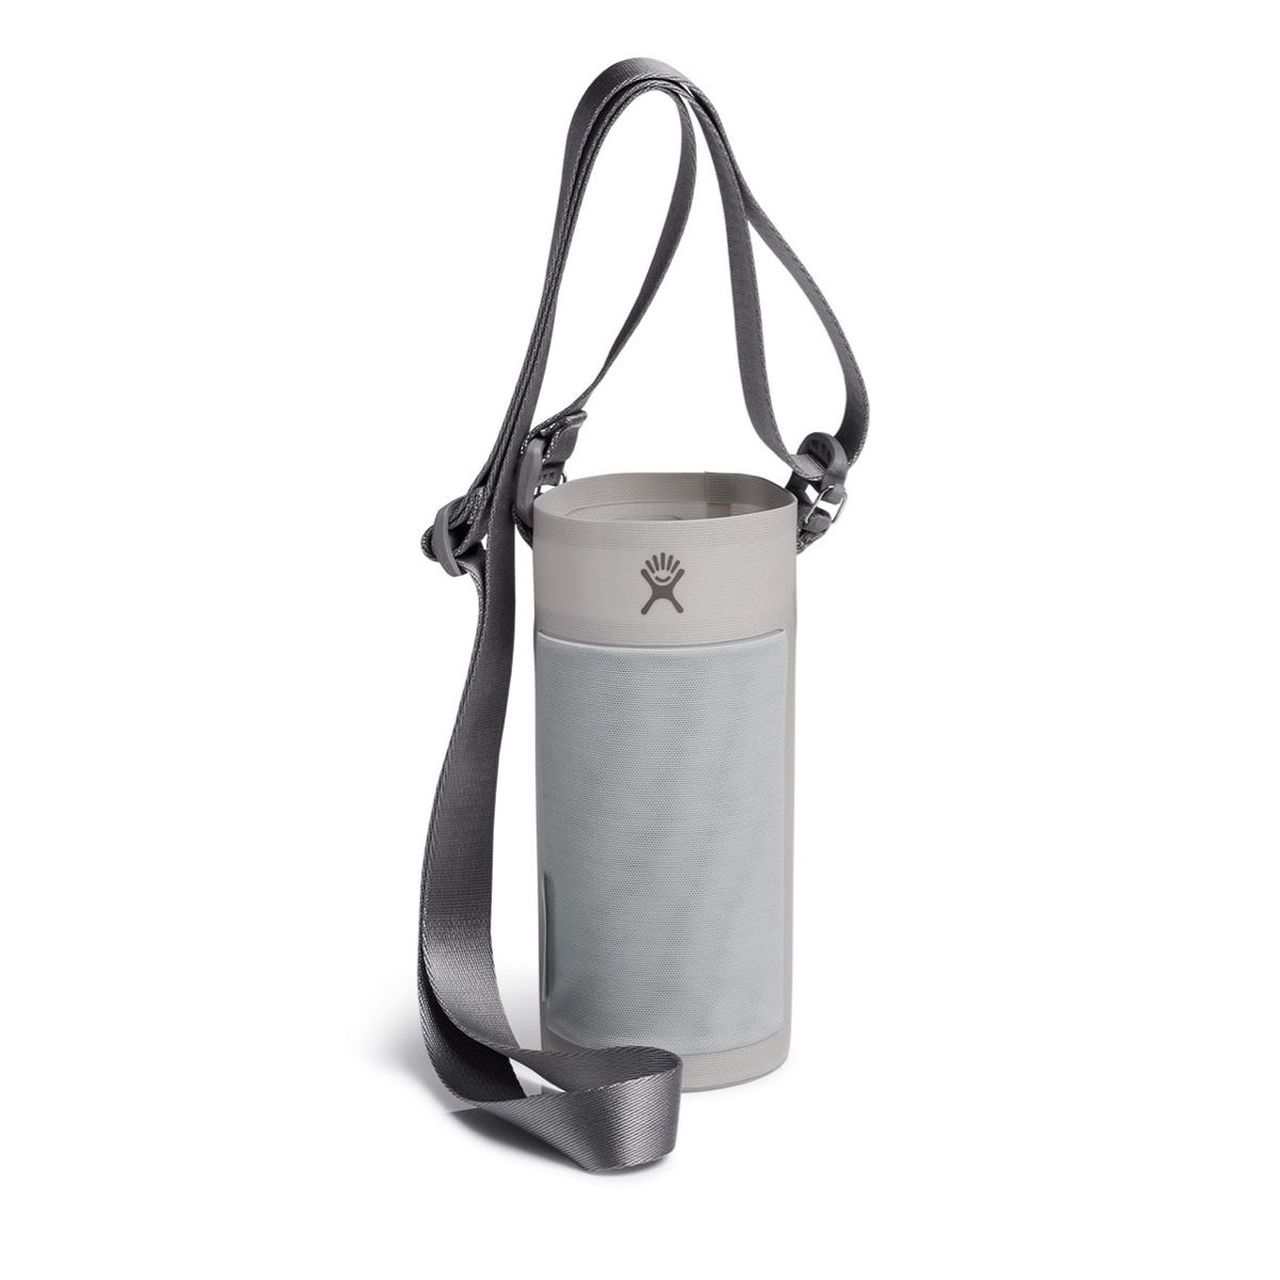 【New Product】Hydroflask Bottle Sling (M size)